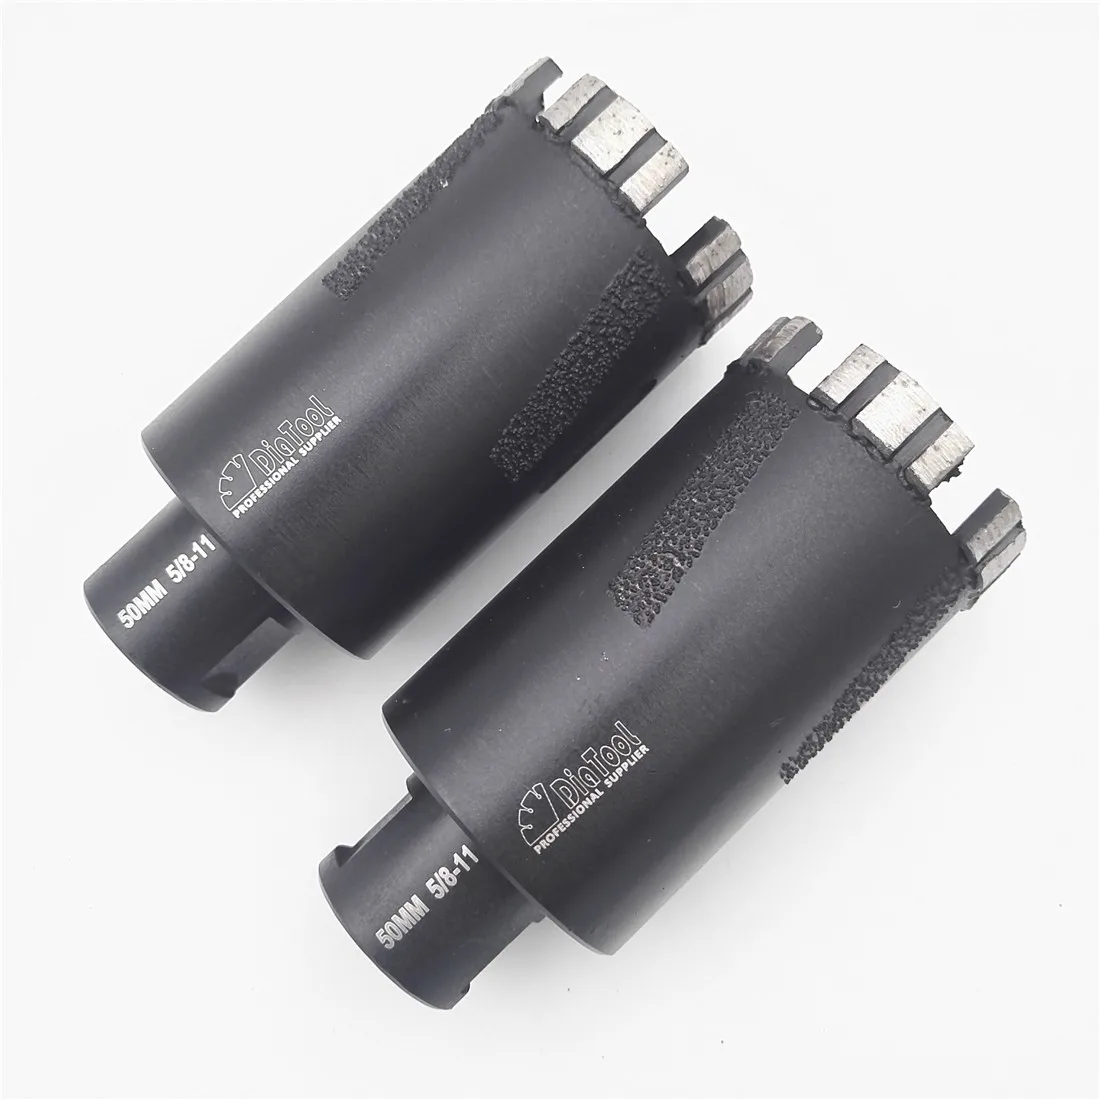 DIATOOL 2pcs Laser Welded Diameter 50mm Diamond Dry Drilling Core Bits With Side Protection 5/8-11 Thread